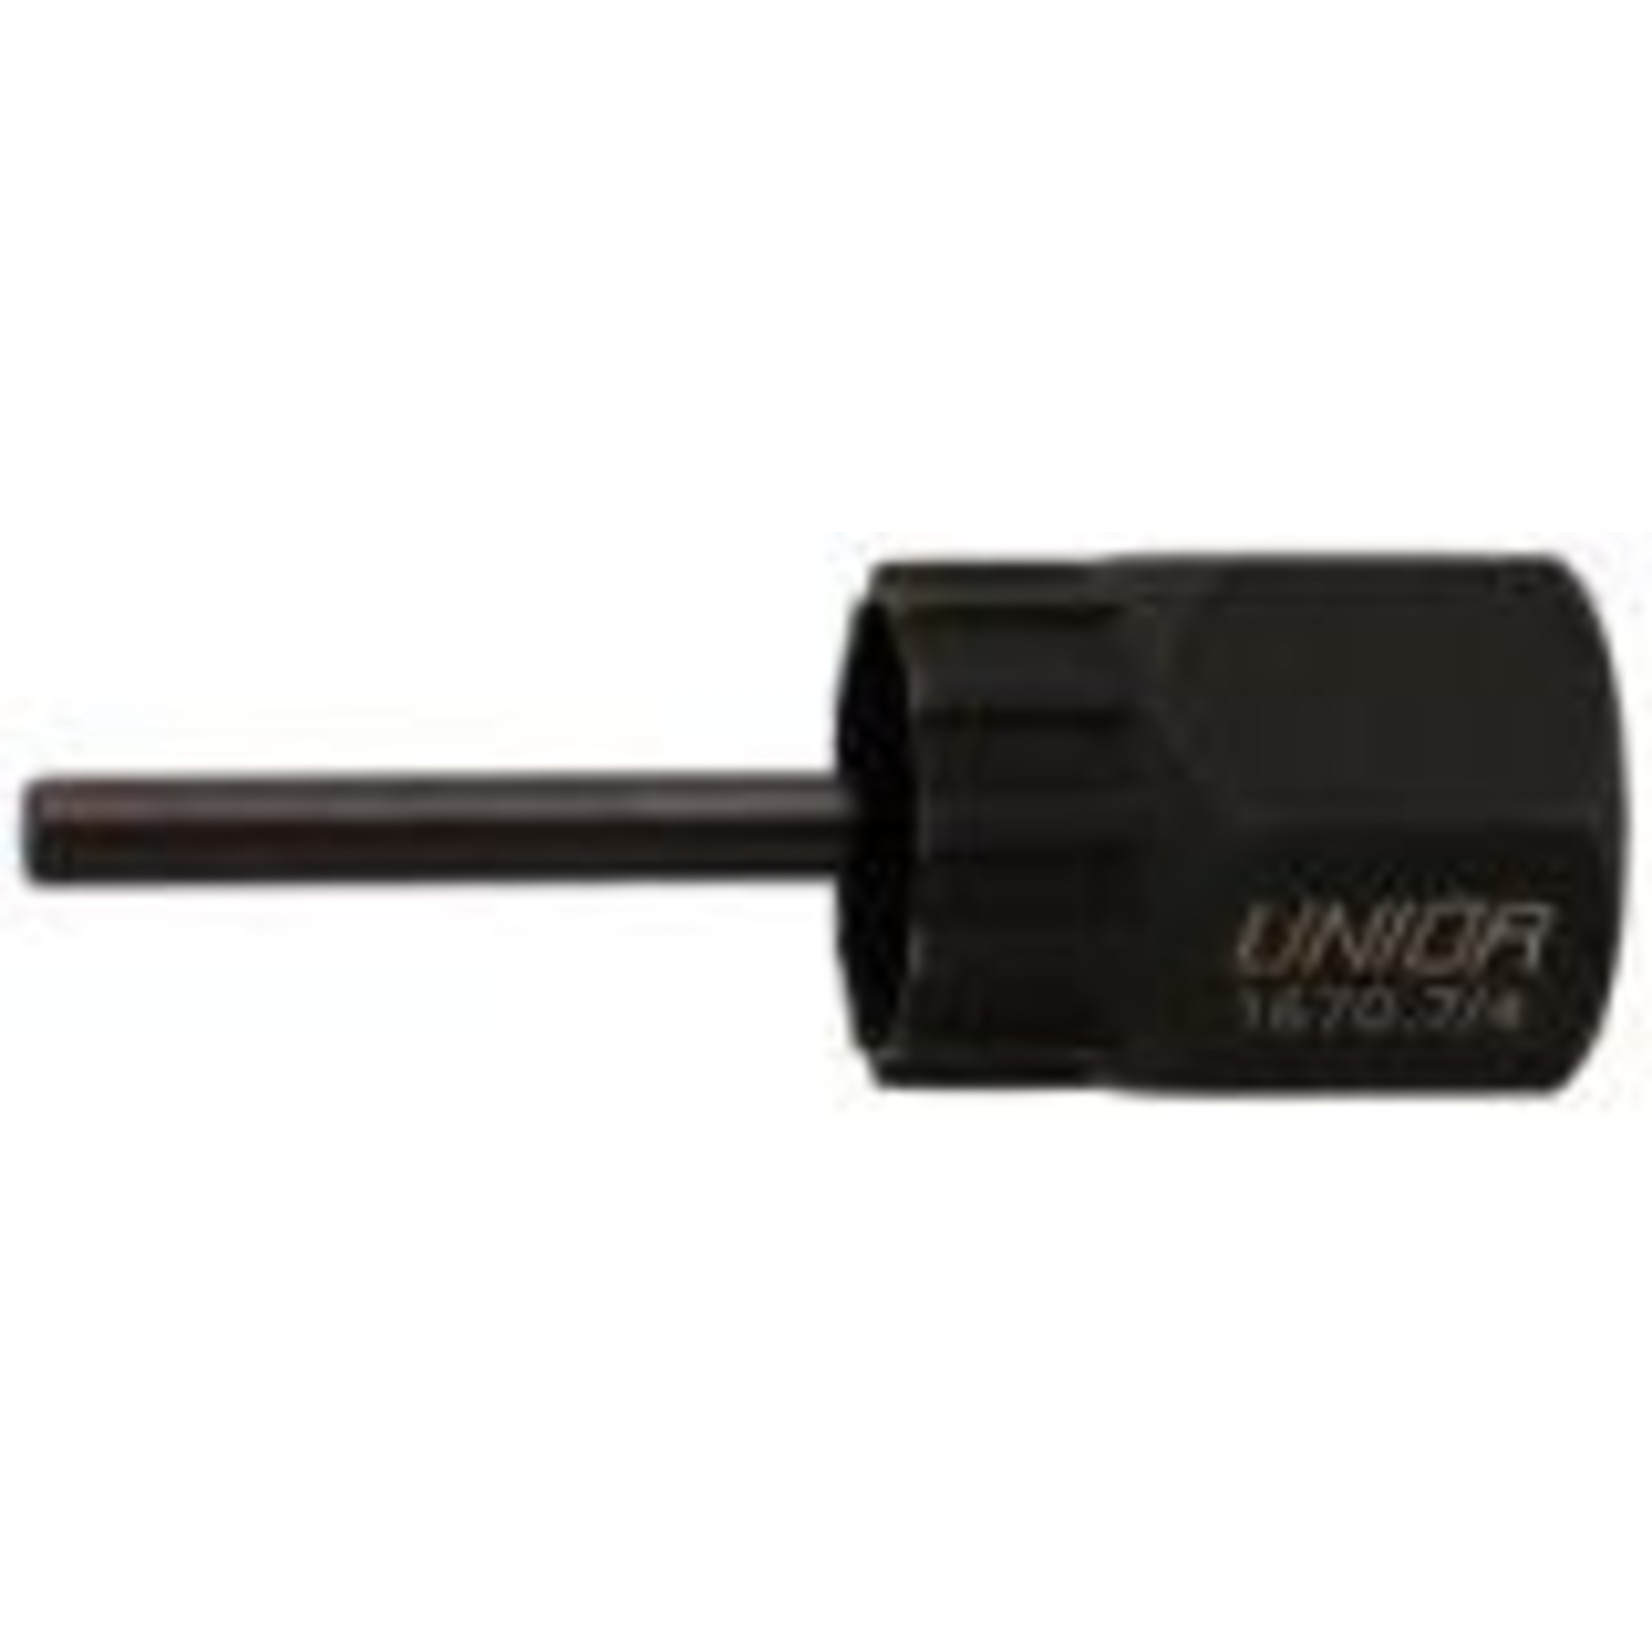 unior Unior Freewheel Remover Shimano Etc With Guide 616067 Professional Bicycle Tool